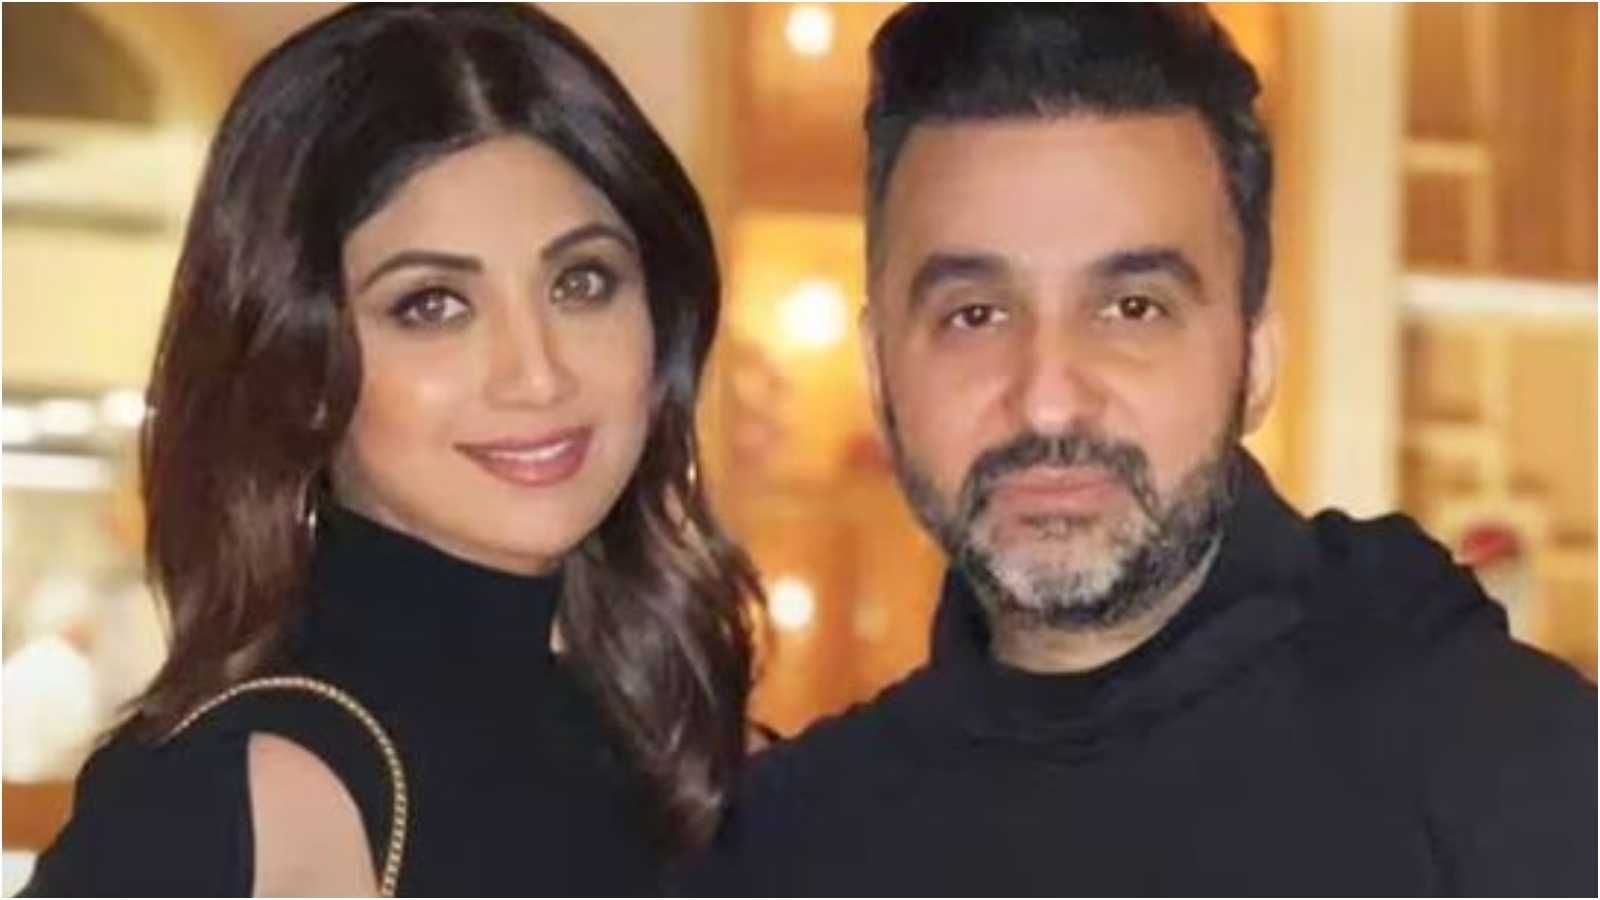 Shilpa Shetty's husband Raj Kundra to make his acting debut, will lead a film based on his arrest in porn case